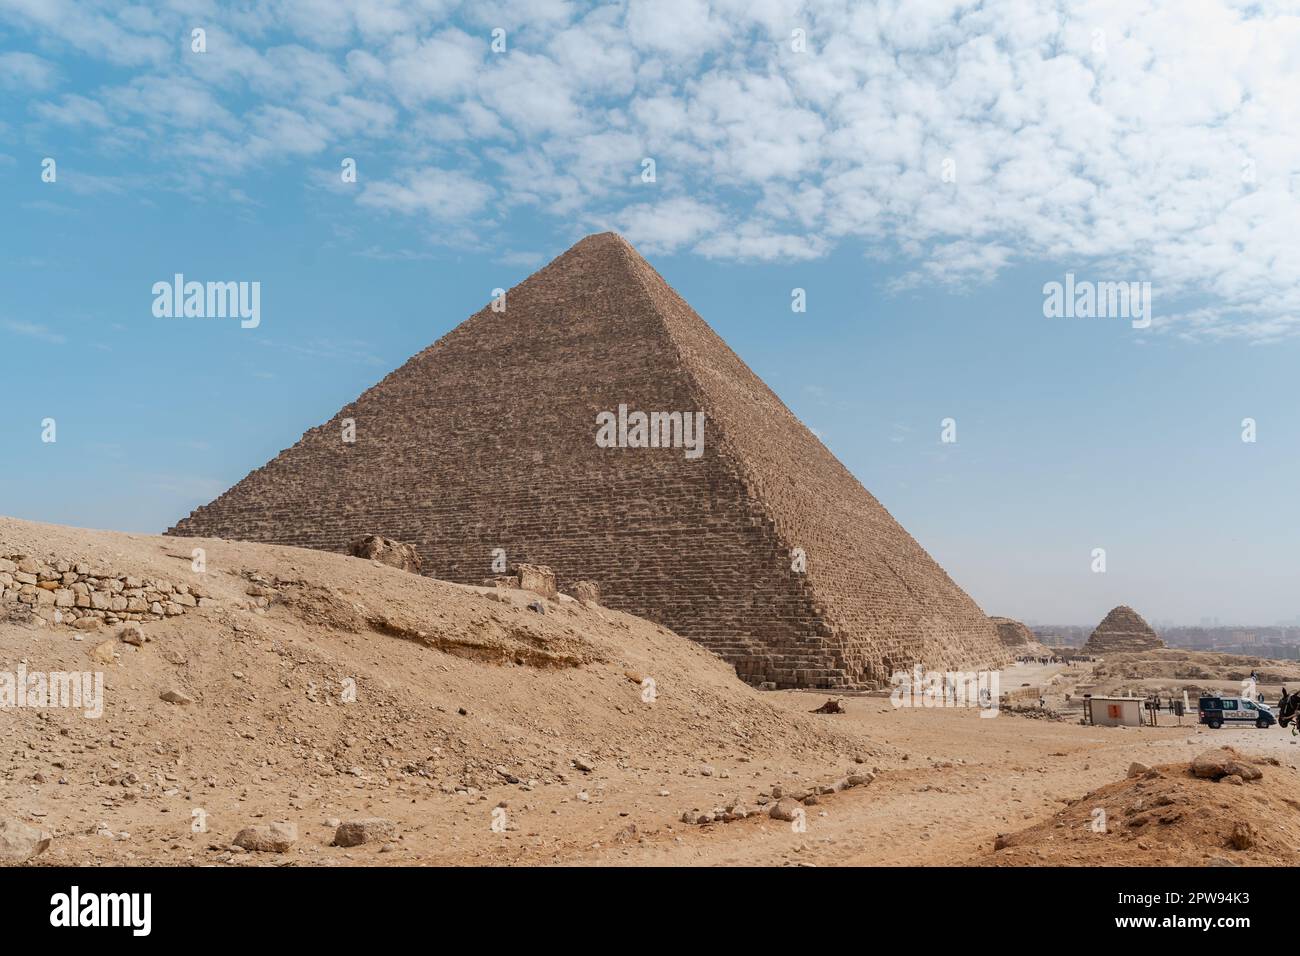 Keops pyramid landscape with a blue sky. Cairo. Egypt Stock Photo